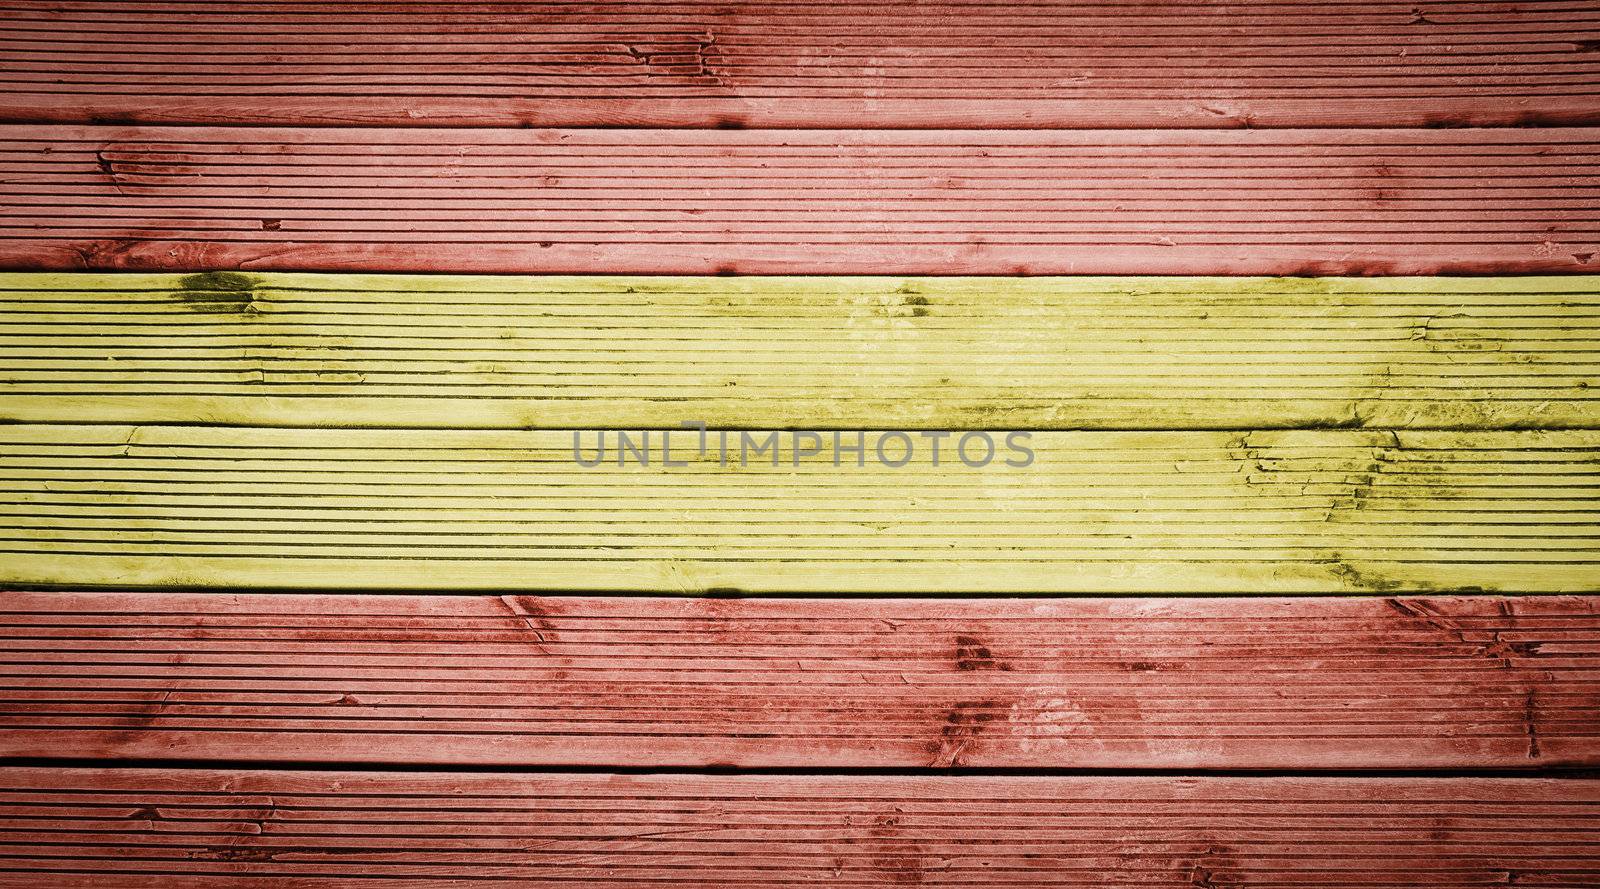 Natural wood planks texture background with the colors of the flag of Spain